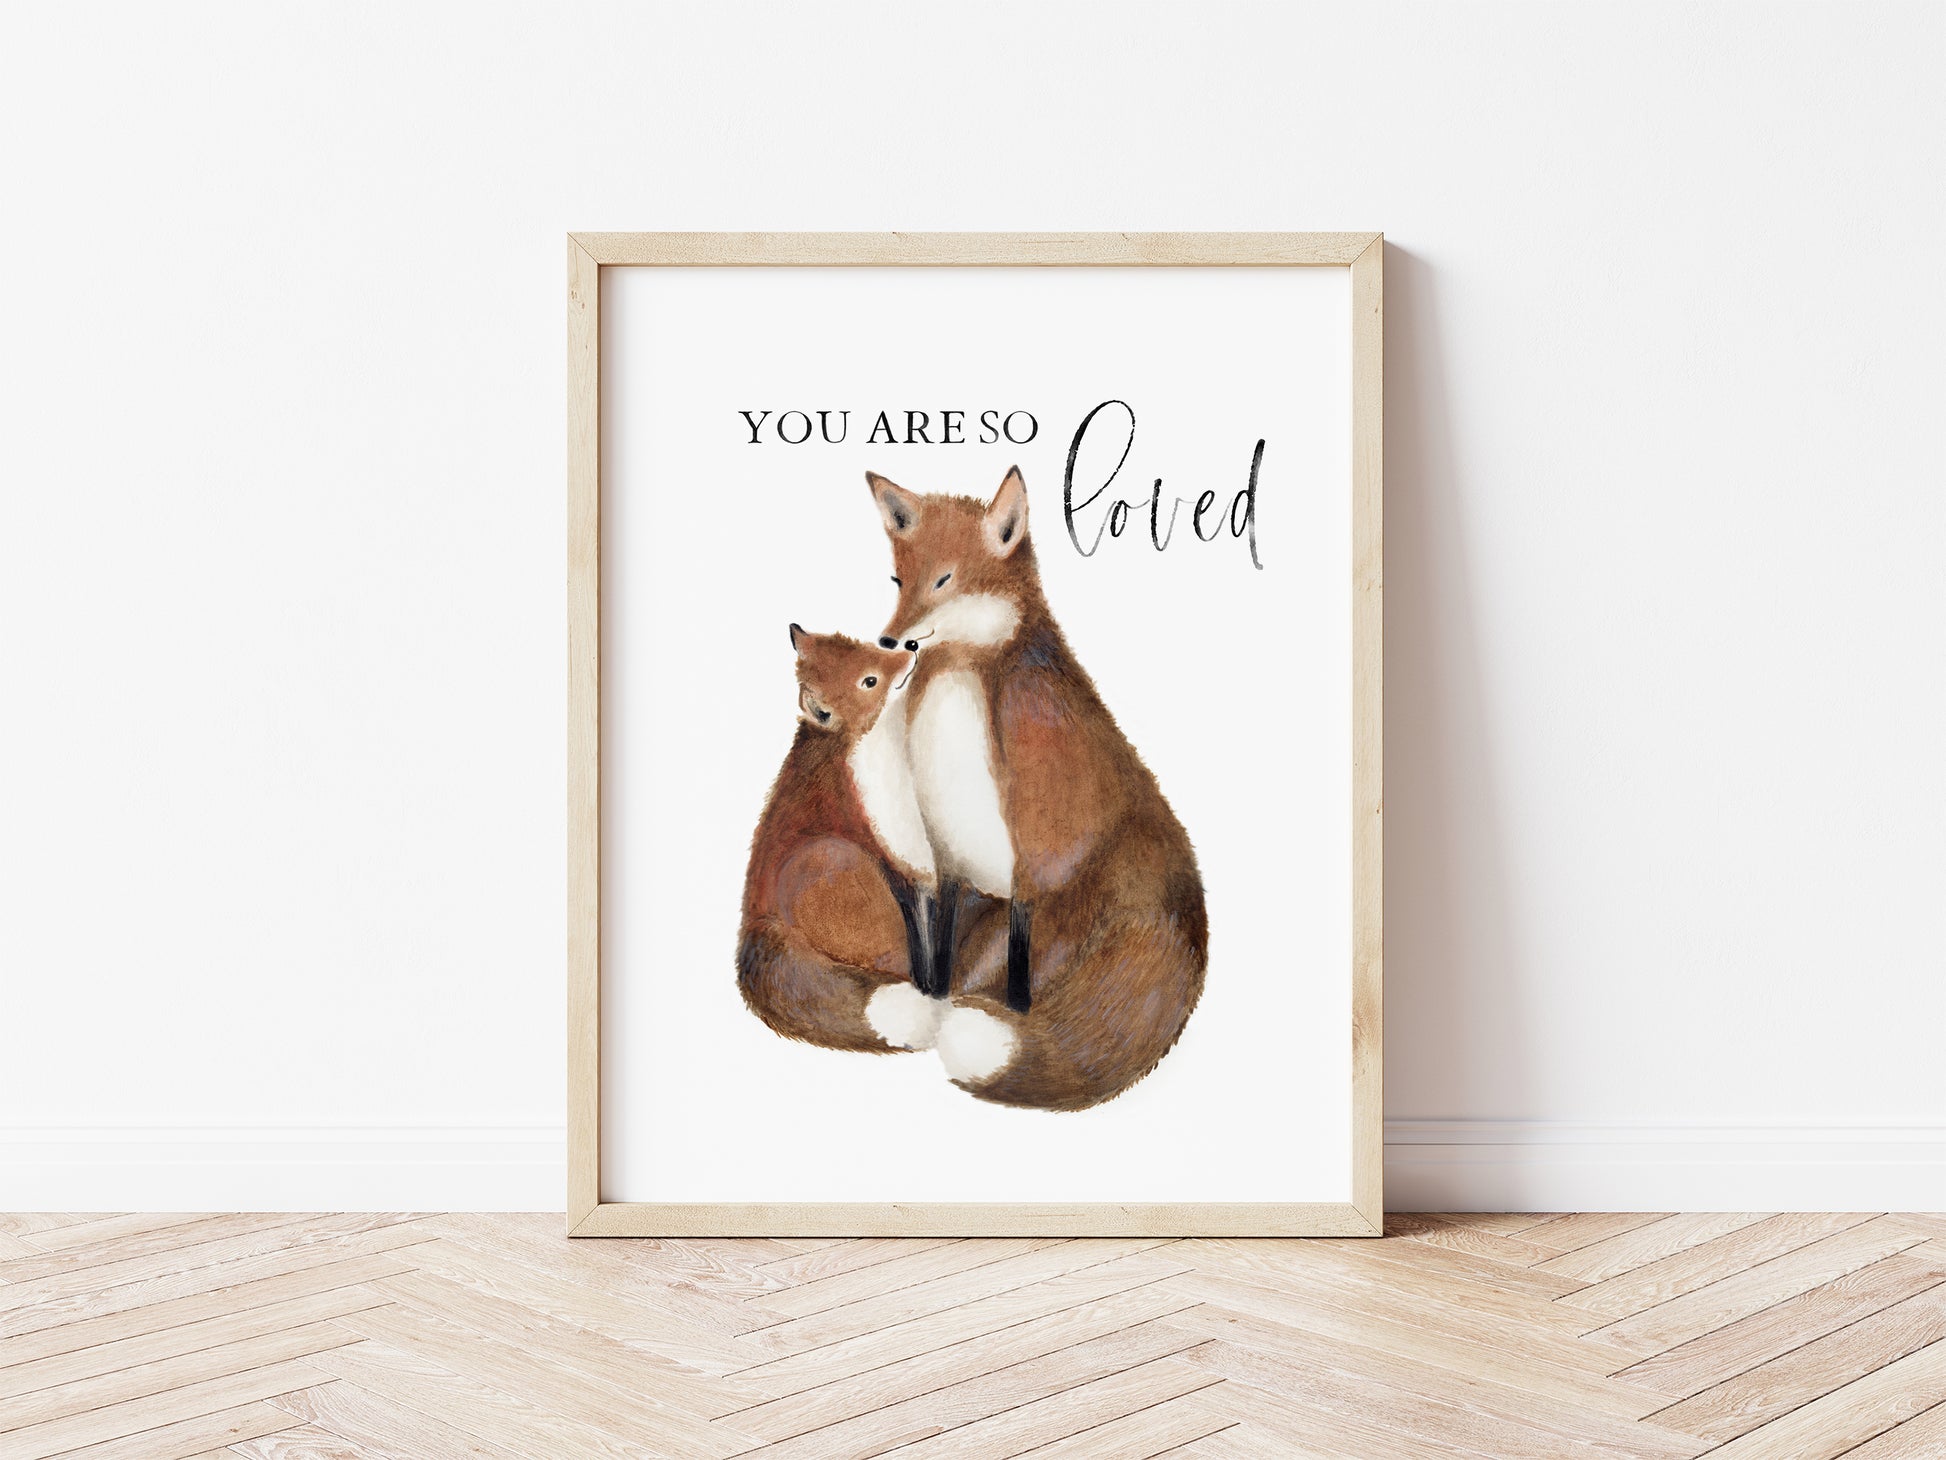 Painting of a mother and baby fox in rich rust, copper, browns and dark orange tones on a plain white background. Words You are So Loved are above the foxes. The picture is framed in a light wood frame and sits on a wood floor. Studio Q - Art by Nicky Quartermaine Scott